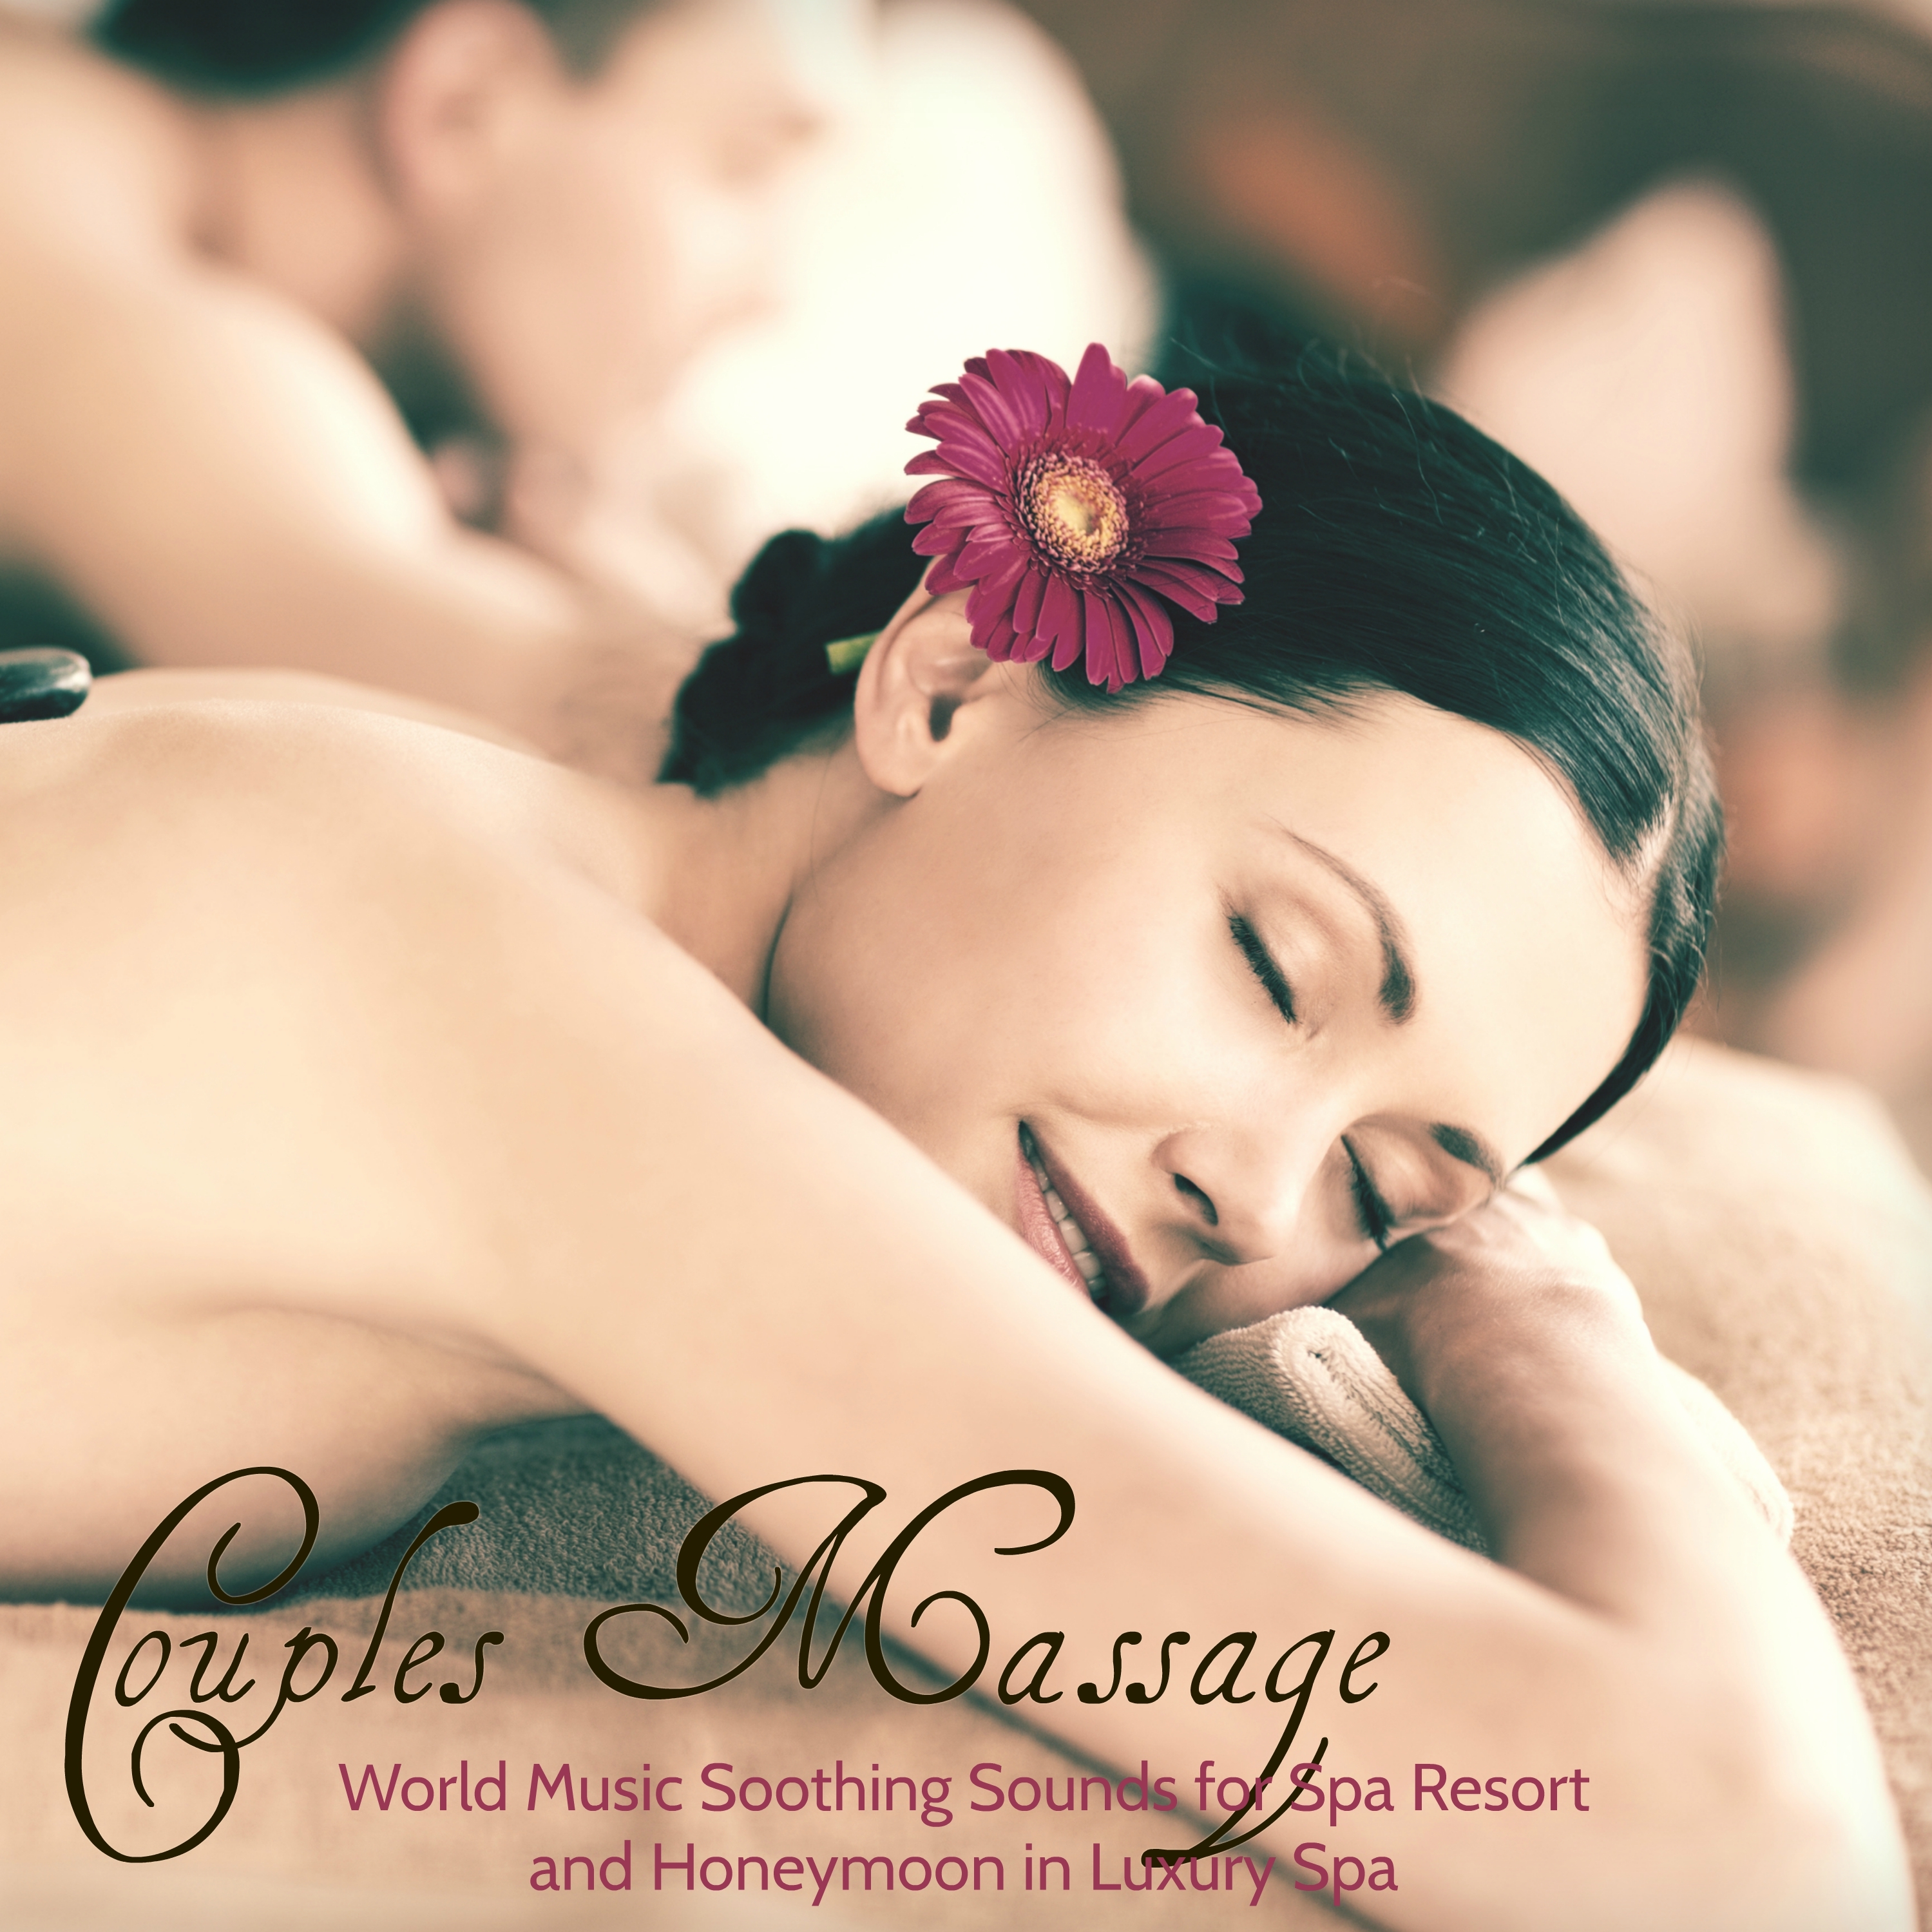 Serenity Spa Music Relaxation